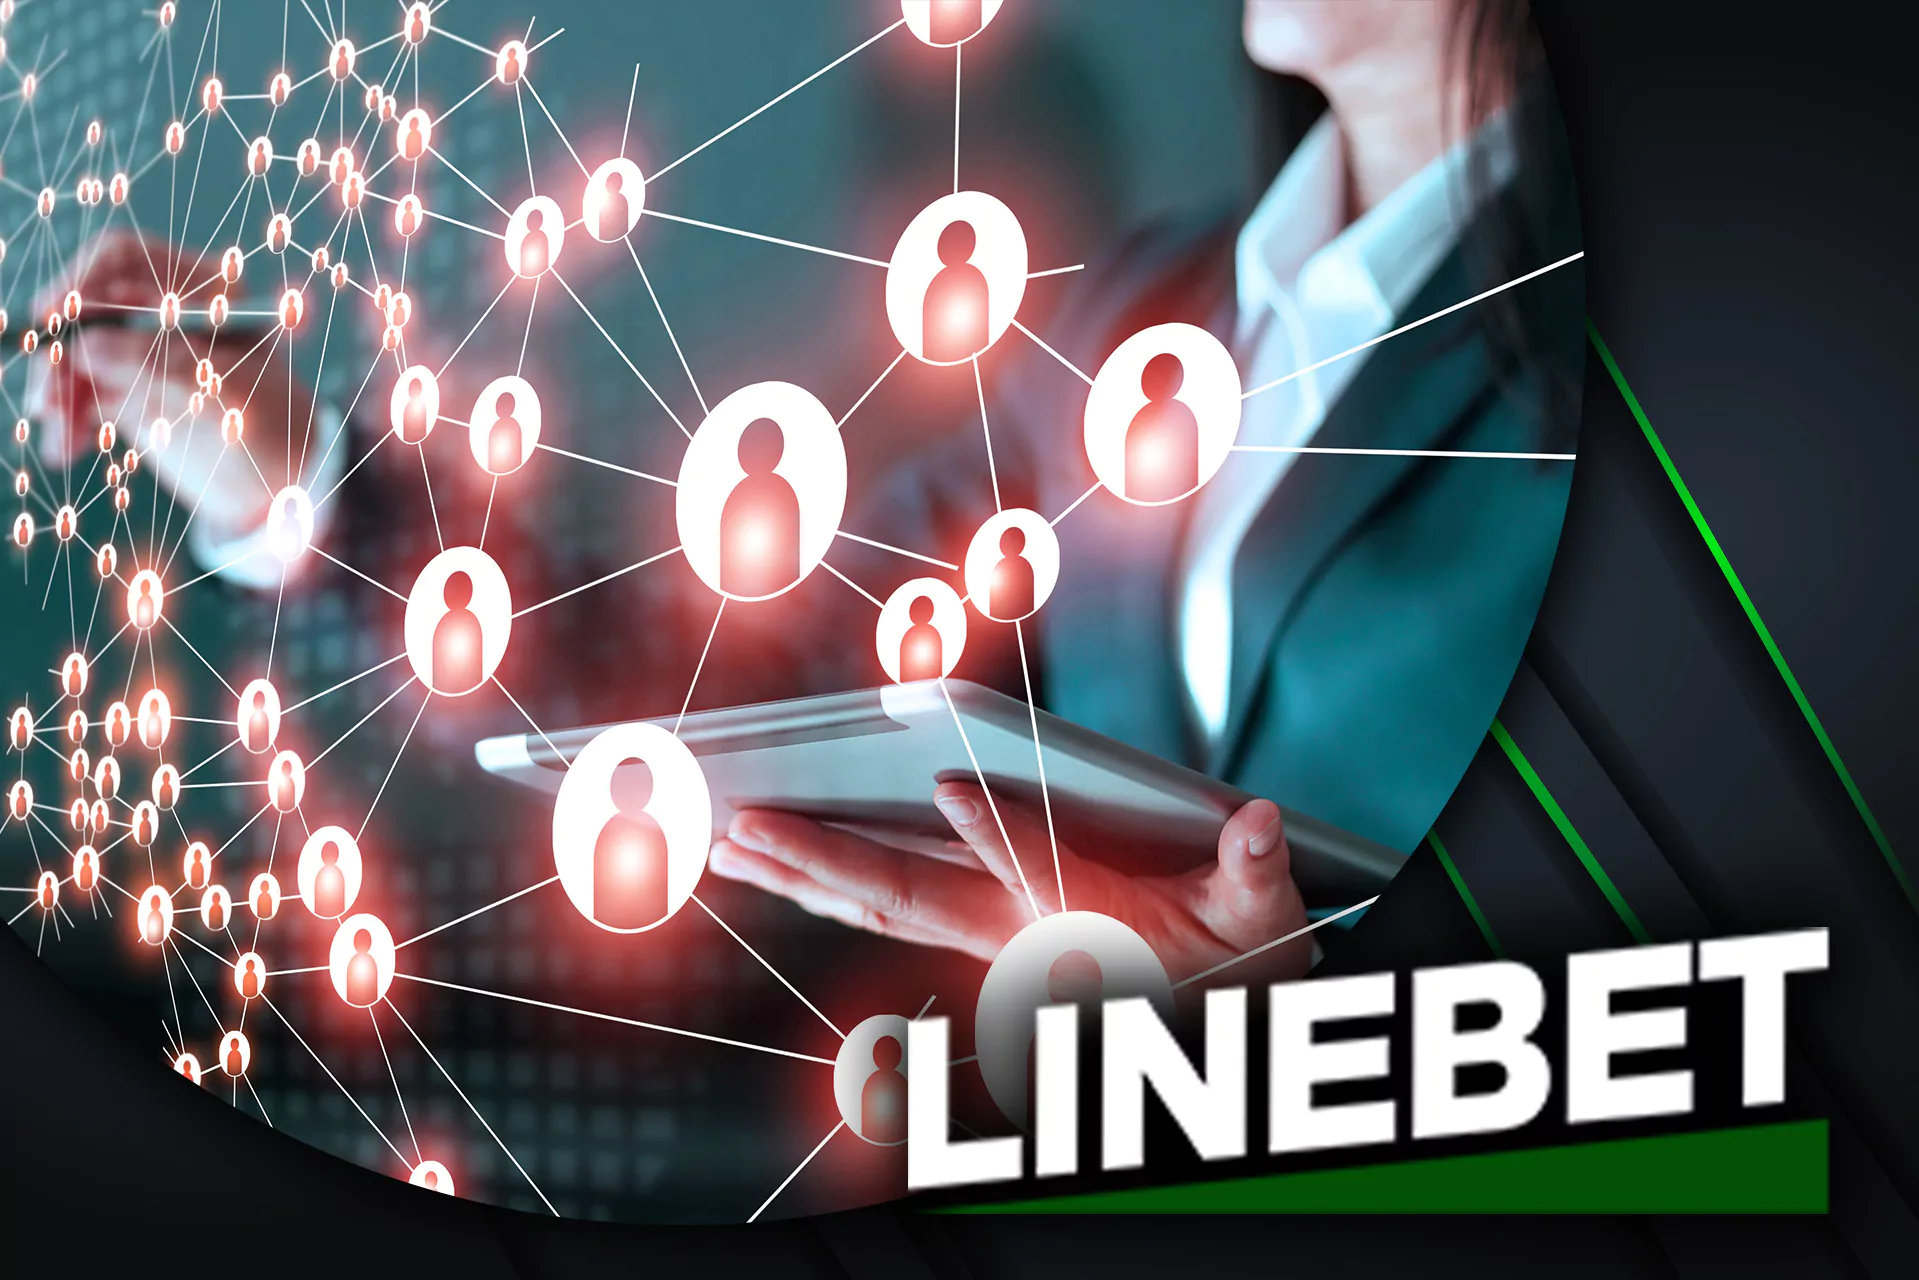 Read the purposes of collecting personal information by Linebet.